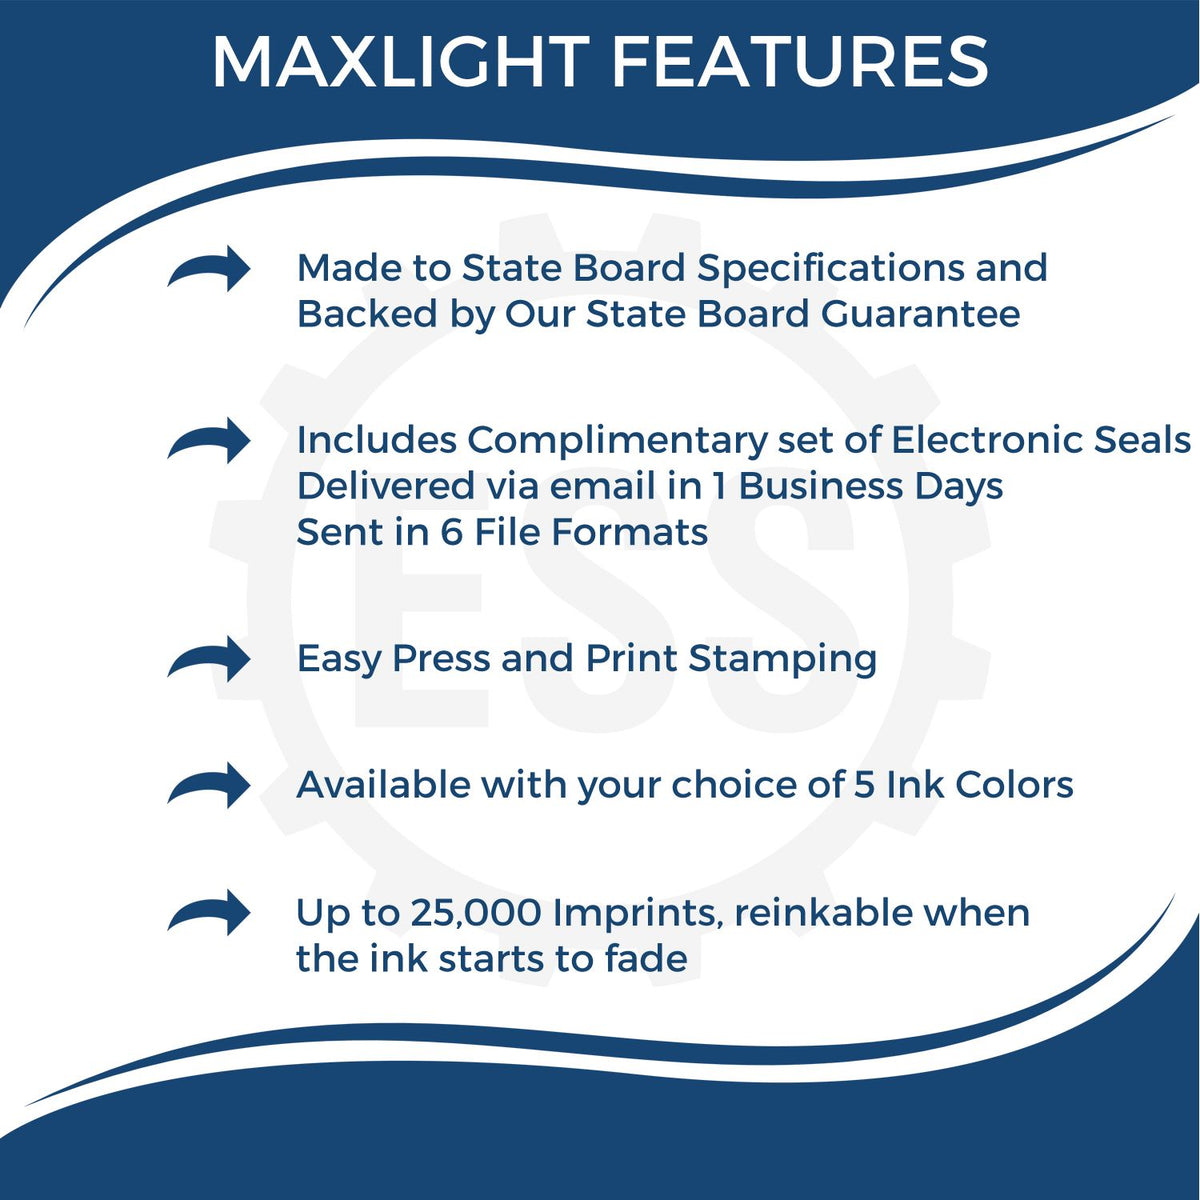 A picture of an infographic highlighting the selling points for the Premium MaxLight Pre-Inked Vermont Landscape Architectural Stamp